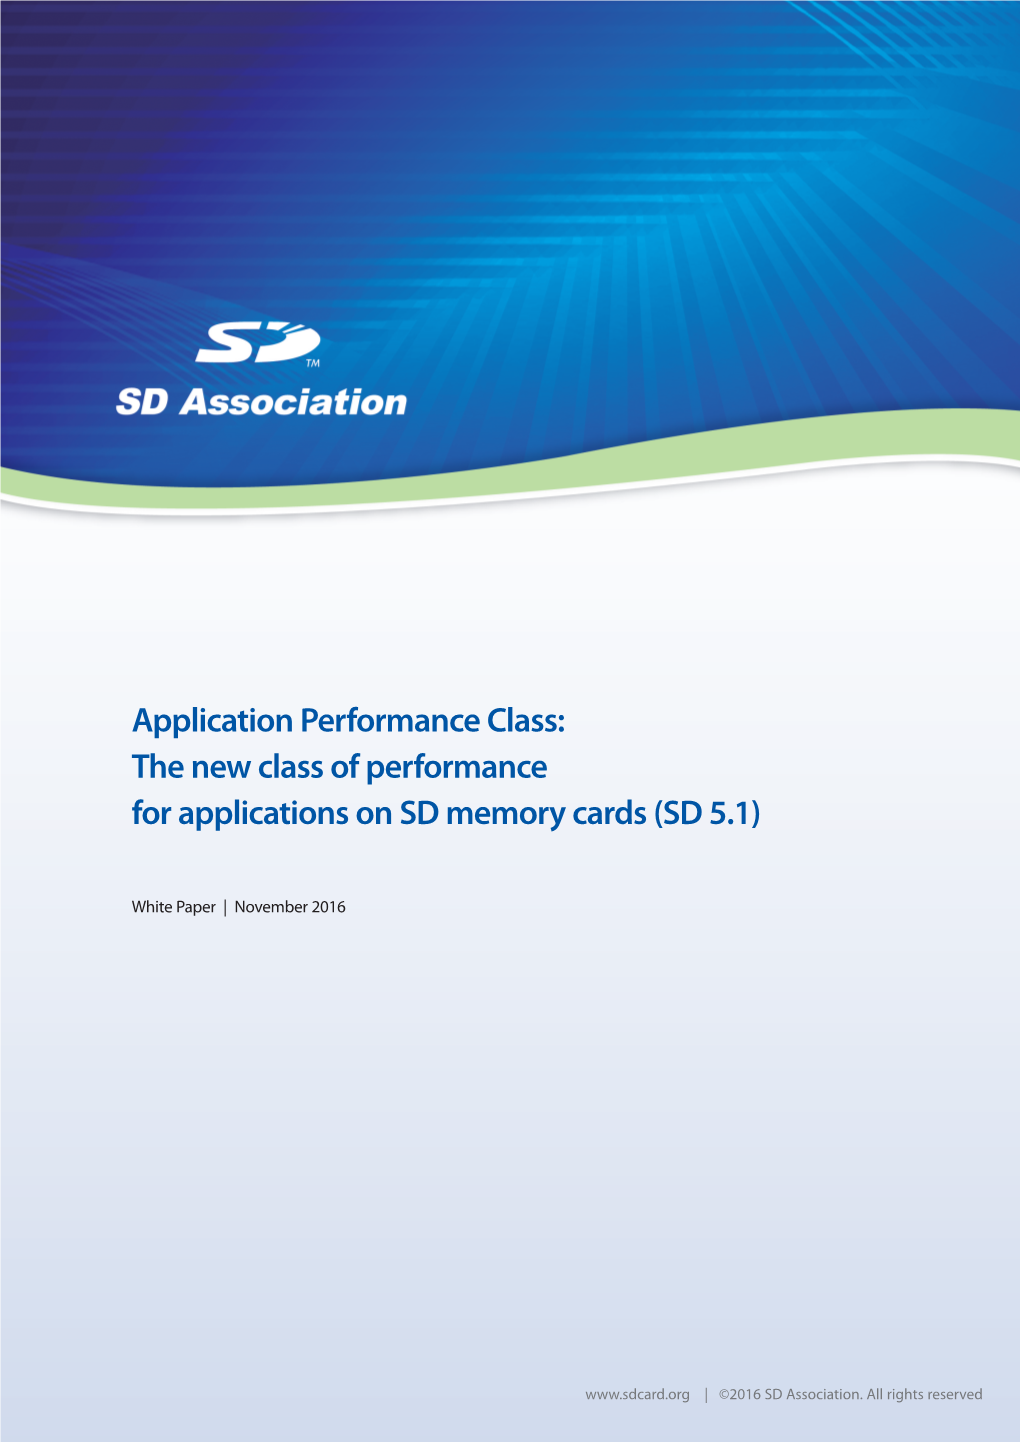 Application Performance Class: the New Class of Performance for Applications on SD Memory Cards (SD 5.1)